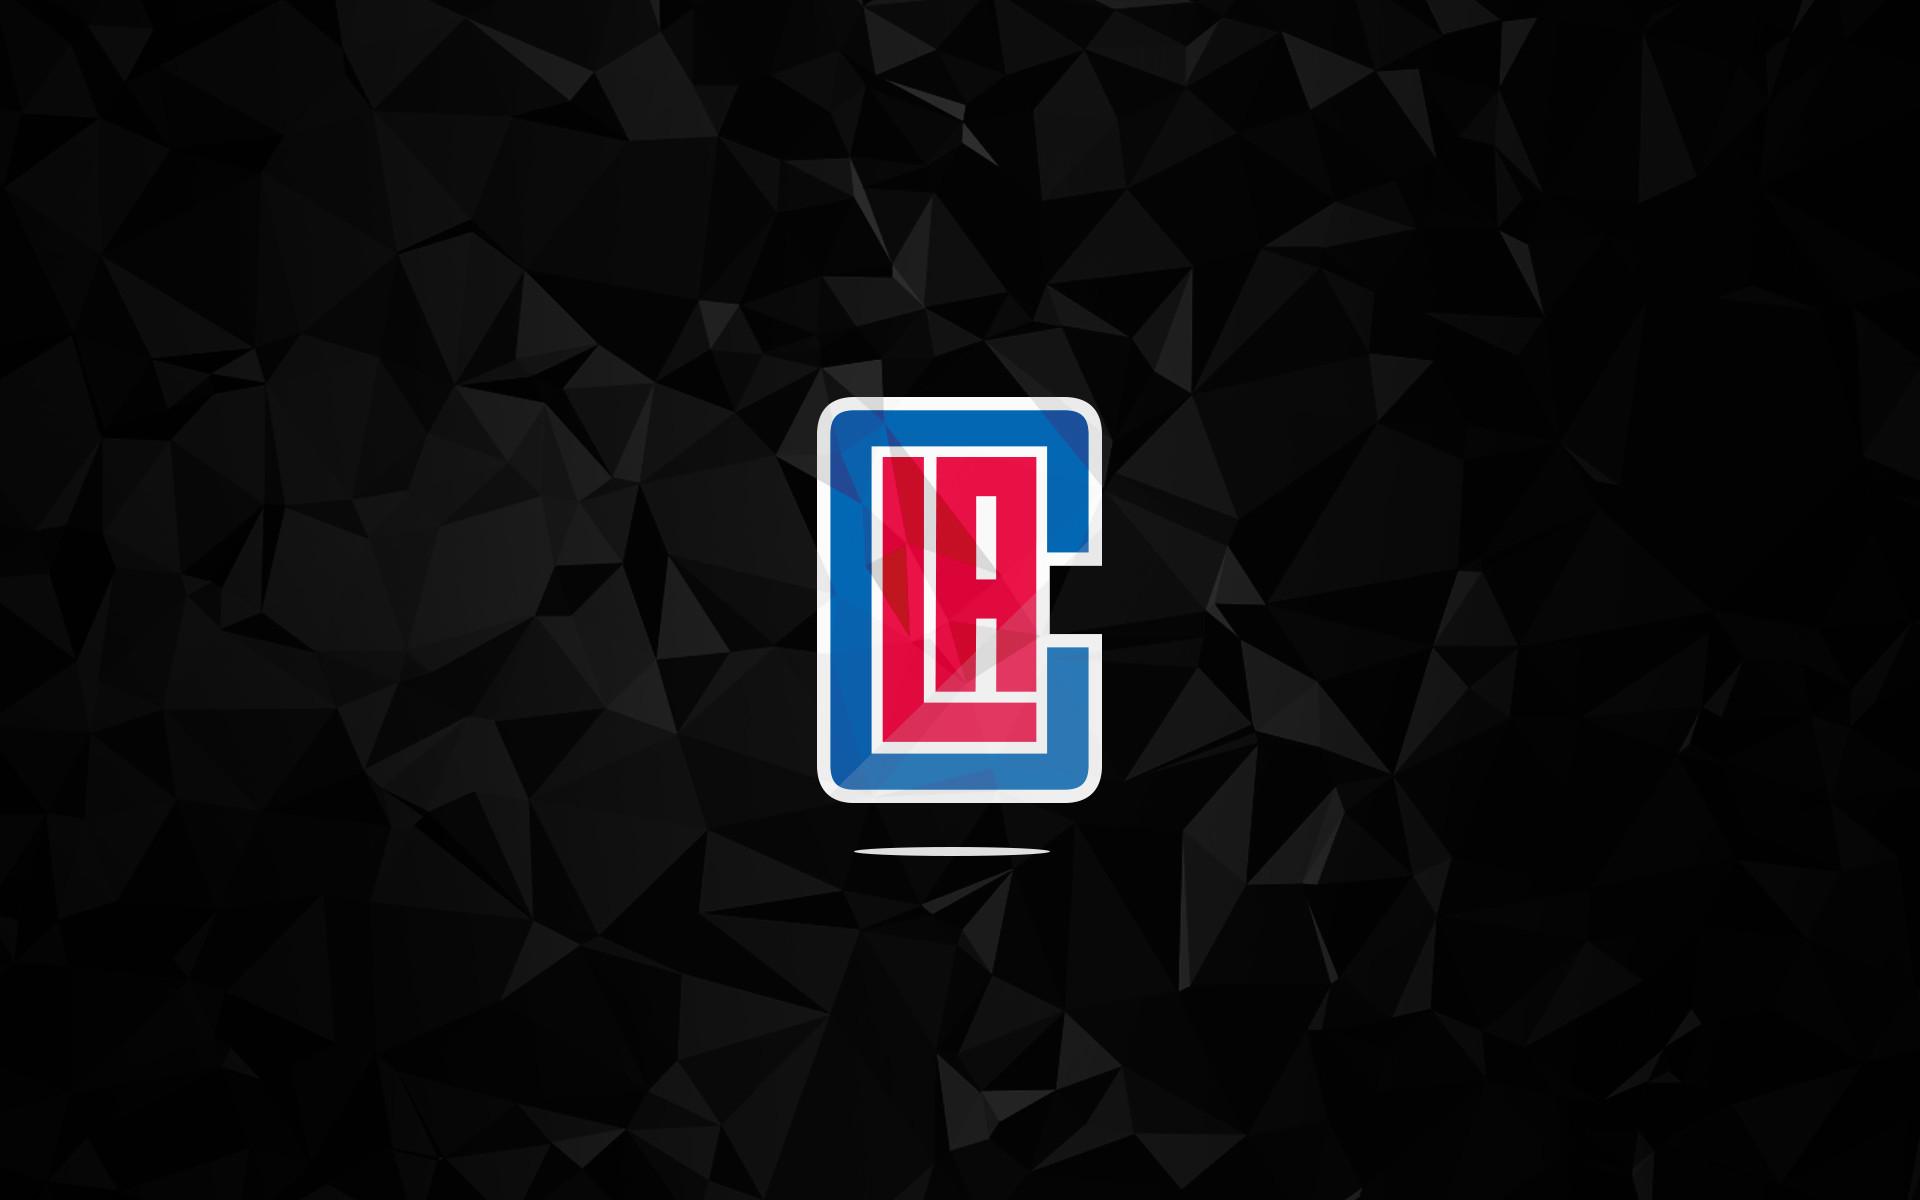 Los angeles clippers 1080P 2K 4K 5K HD wallpapers free download   Wallpaper Flare